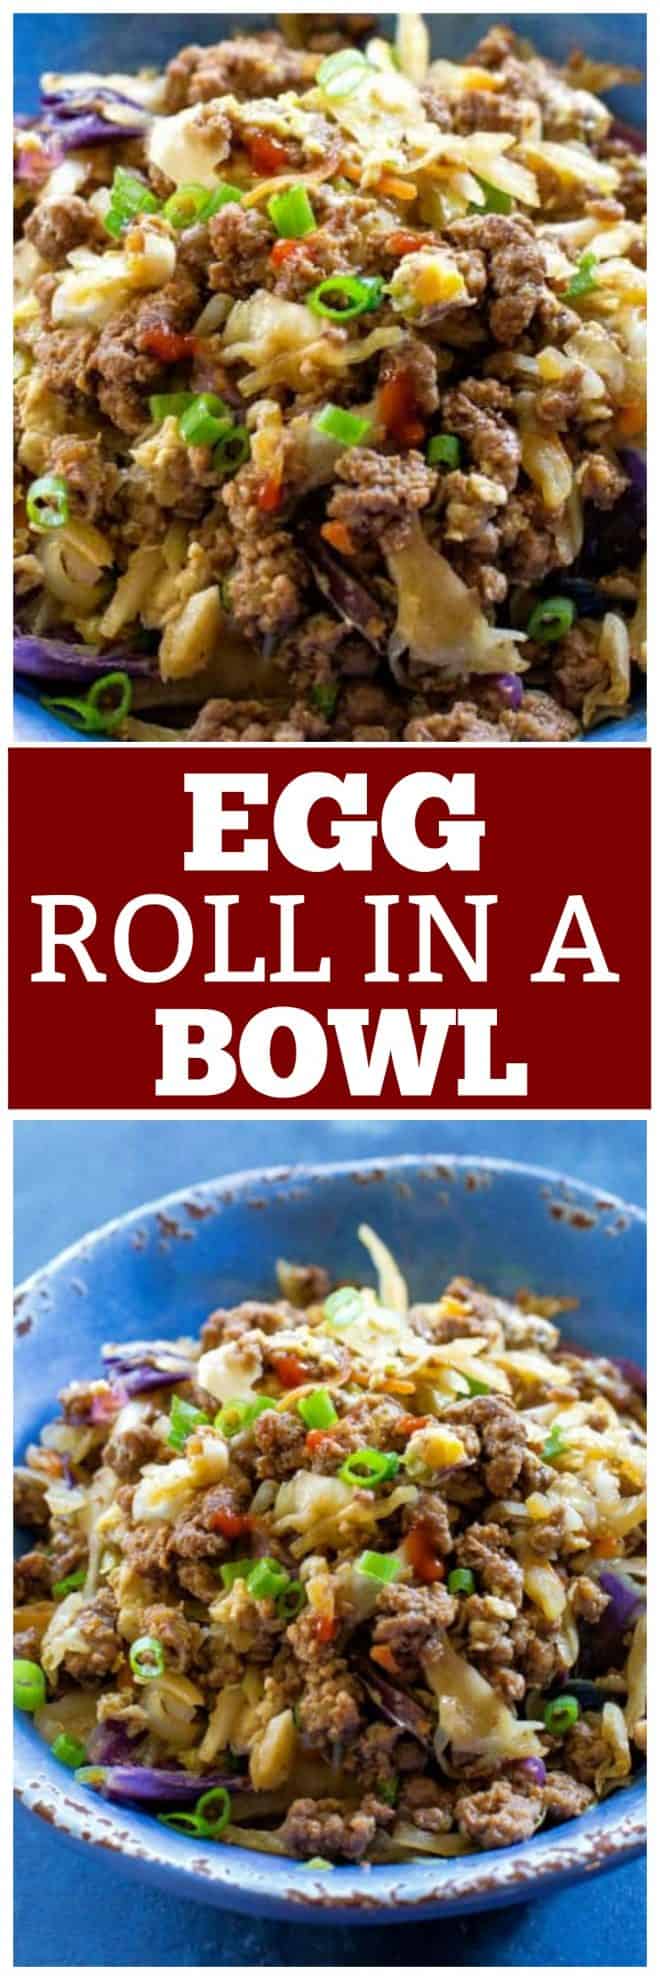 This Egg Roll in a Bowl comes together in 15 minutes and is packed with protein and flavor. #pork #beef #healthy #keto #recipes #ketorecipes #eggrollinabowl